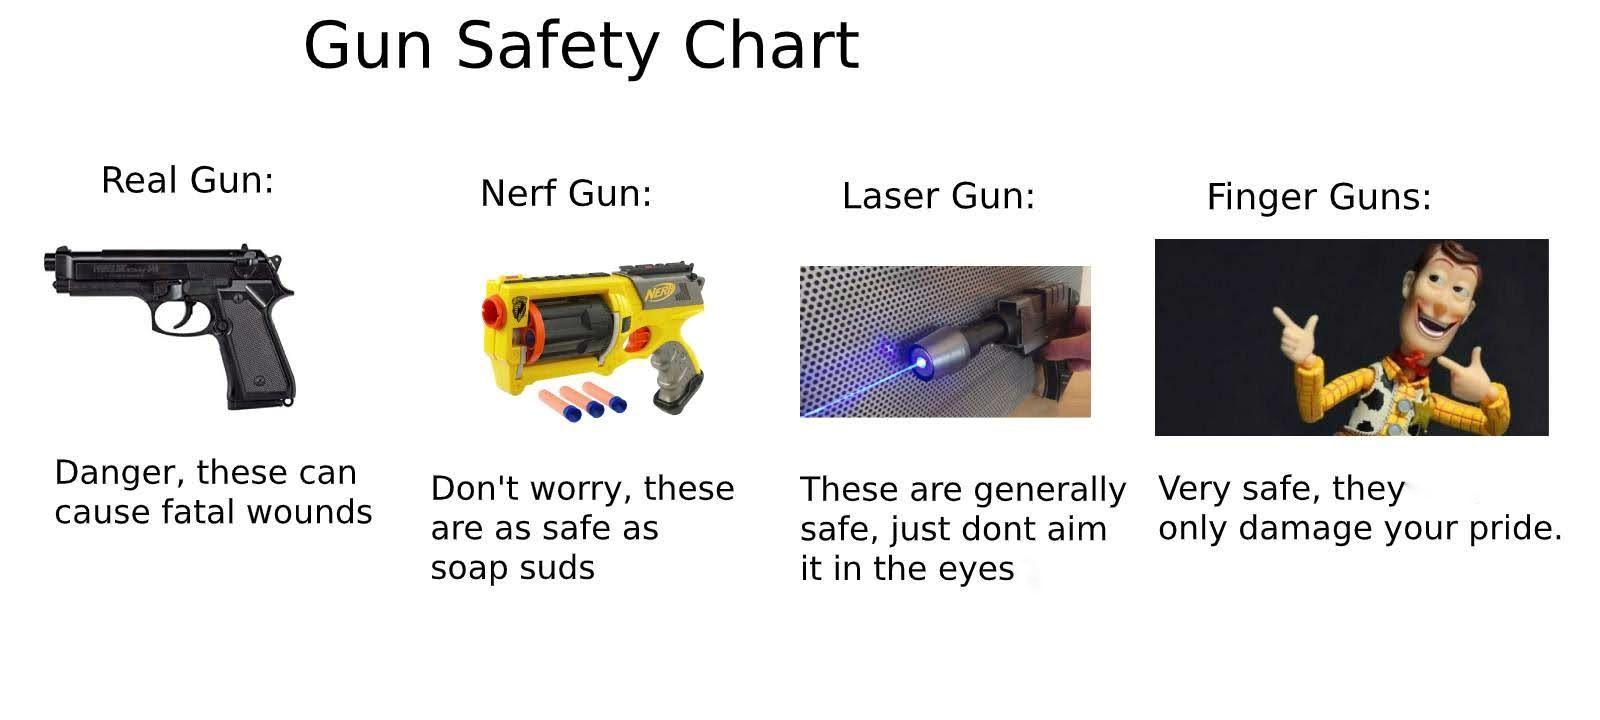 Dank Meme dank-memes cute text: Gun Safety Chart Real Gun: Danger, these can cause fatal wounds Nerf Gun: Don't worry, these are as safe as soap suds Laser Gun: These are generally safe, just dont aim it in the eyes Finger Guns: Very safe, they only damage your pride. 